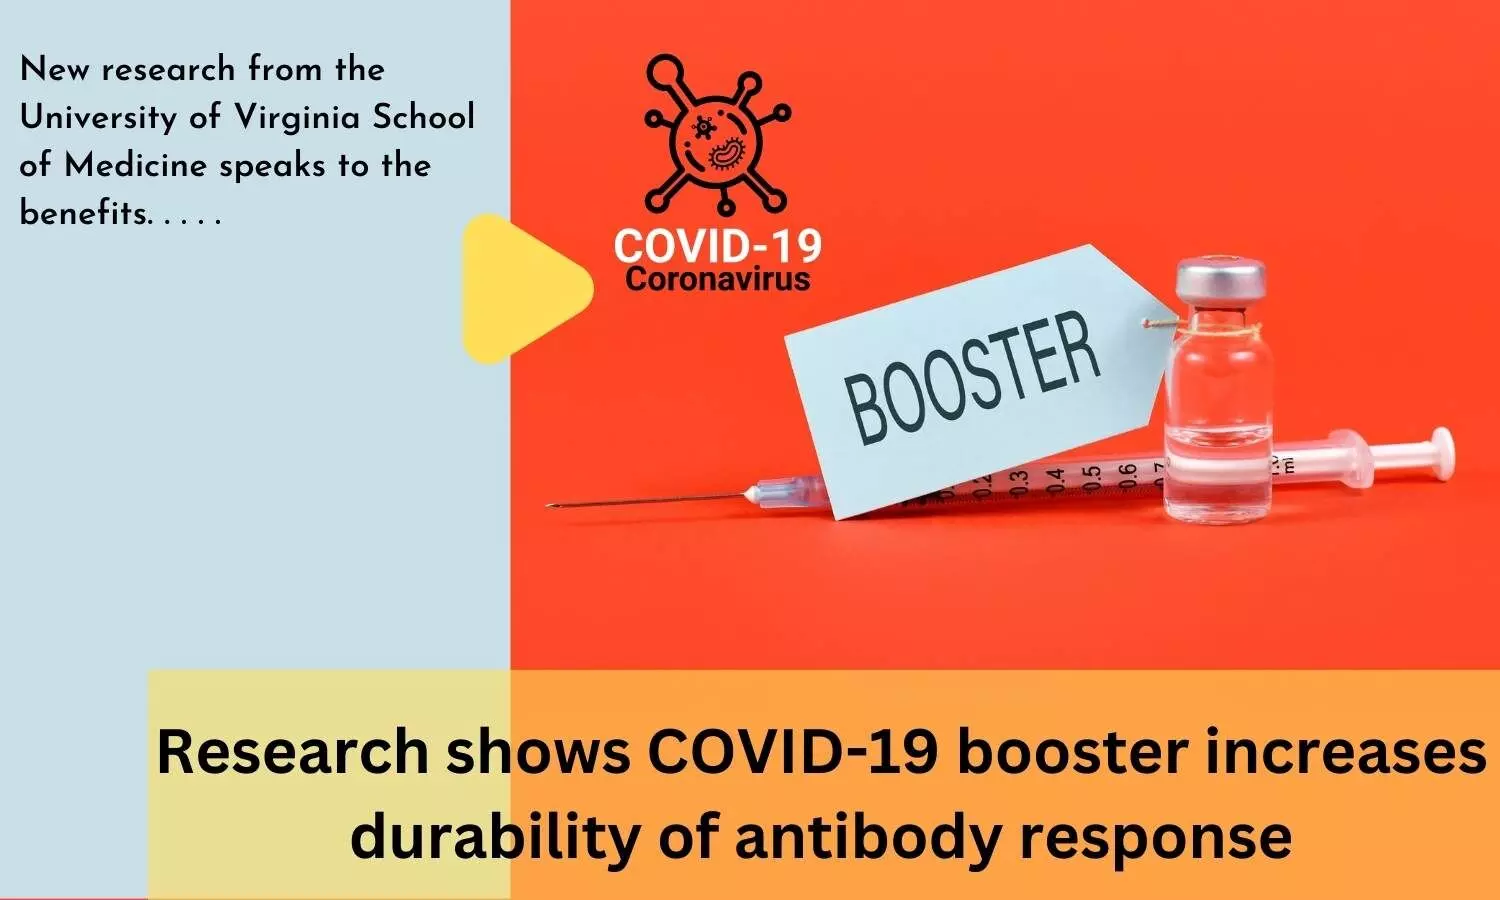 Research shows COVID-19 booster increases durability of antibody response